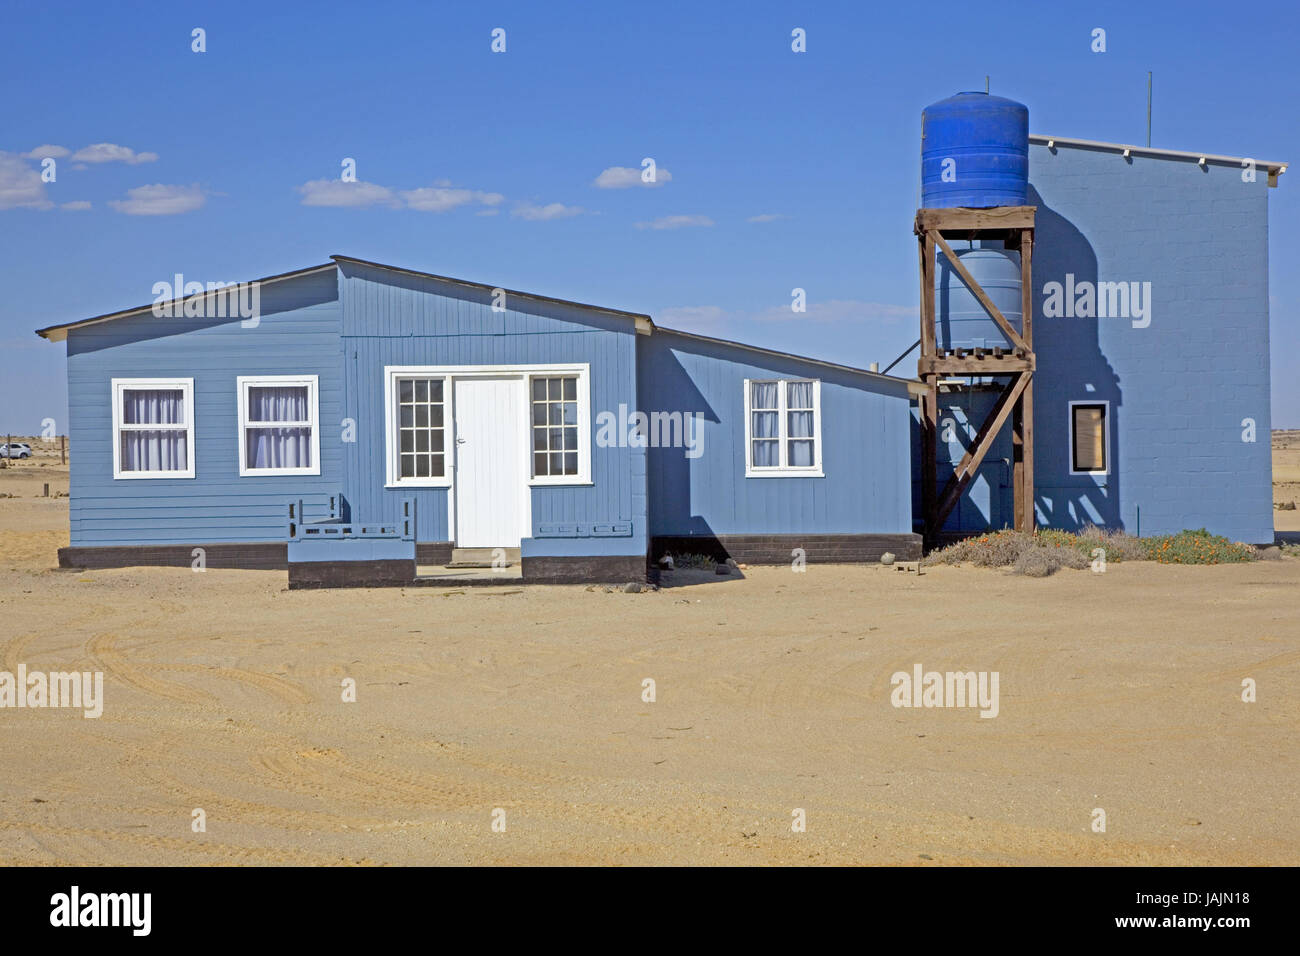 Africa,South-West Africa,Namibia,Erongo  region,Wlotzkasbaken,coast,settlement,houses,buildings,summer  cottages,houses,blue,rich in fantasia,worth seeing,interesting,sandy  beach,Sand,sky,blue,South-West Africa,Wlotzkasbaken Stock Photo - Alamy